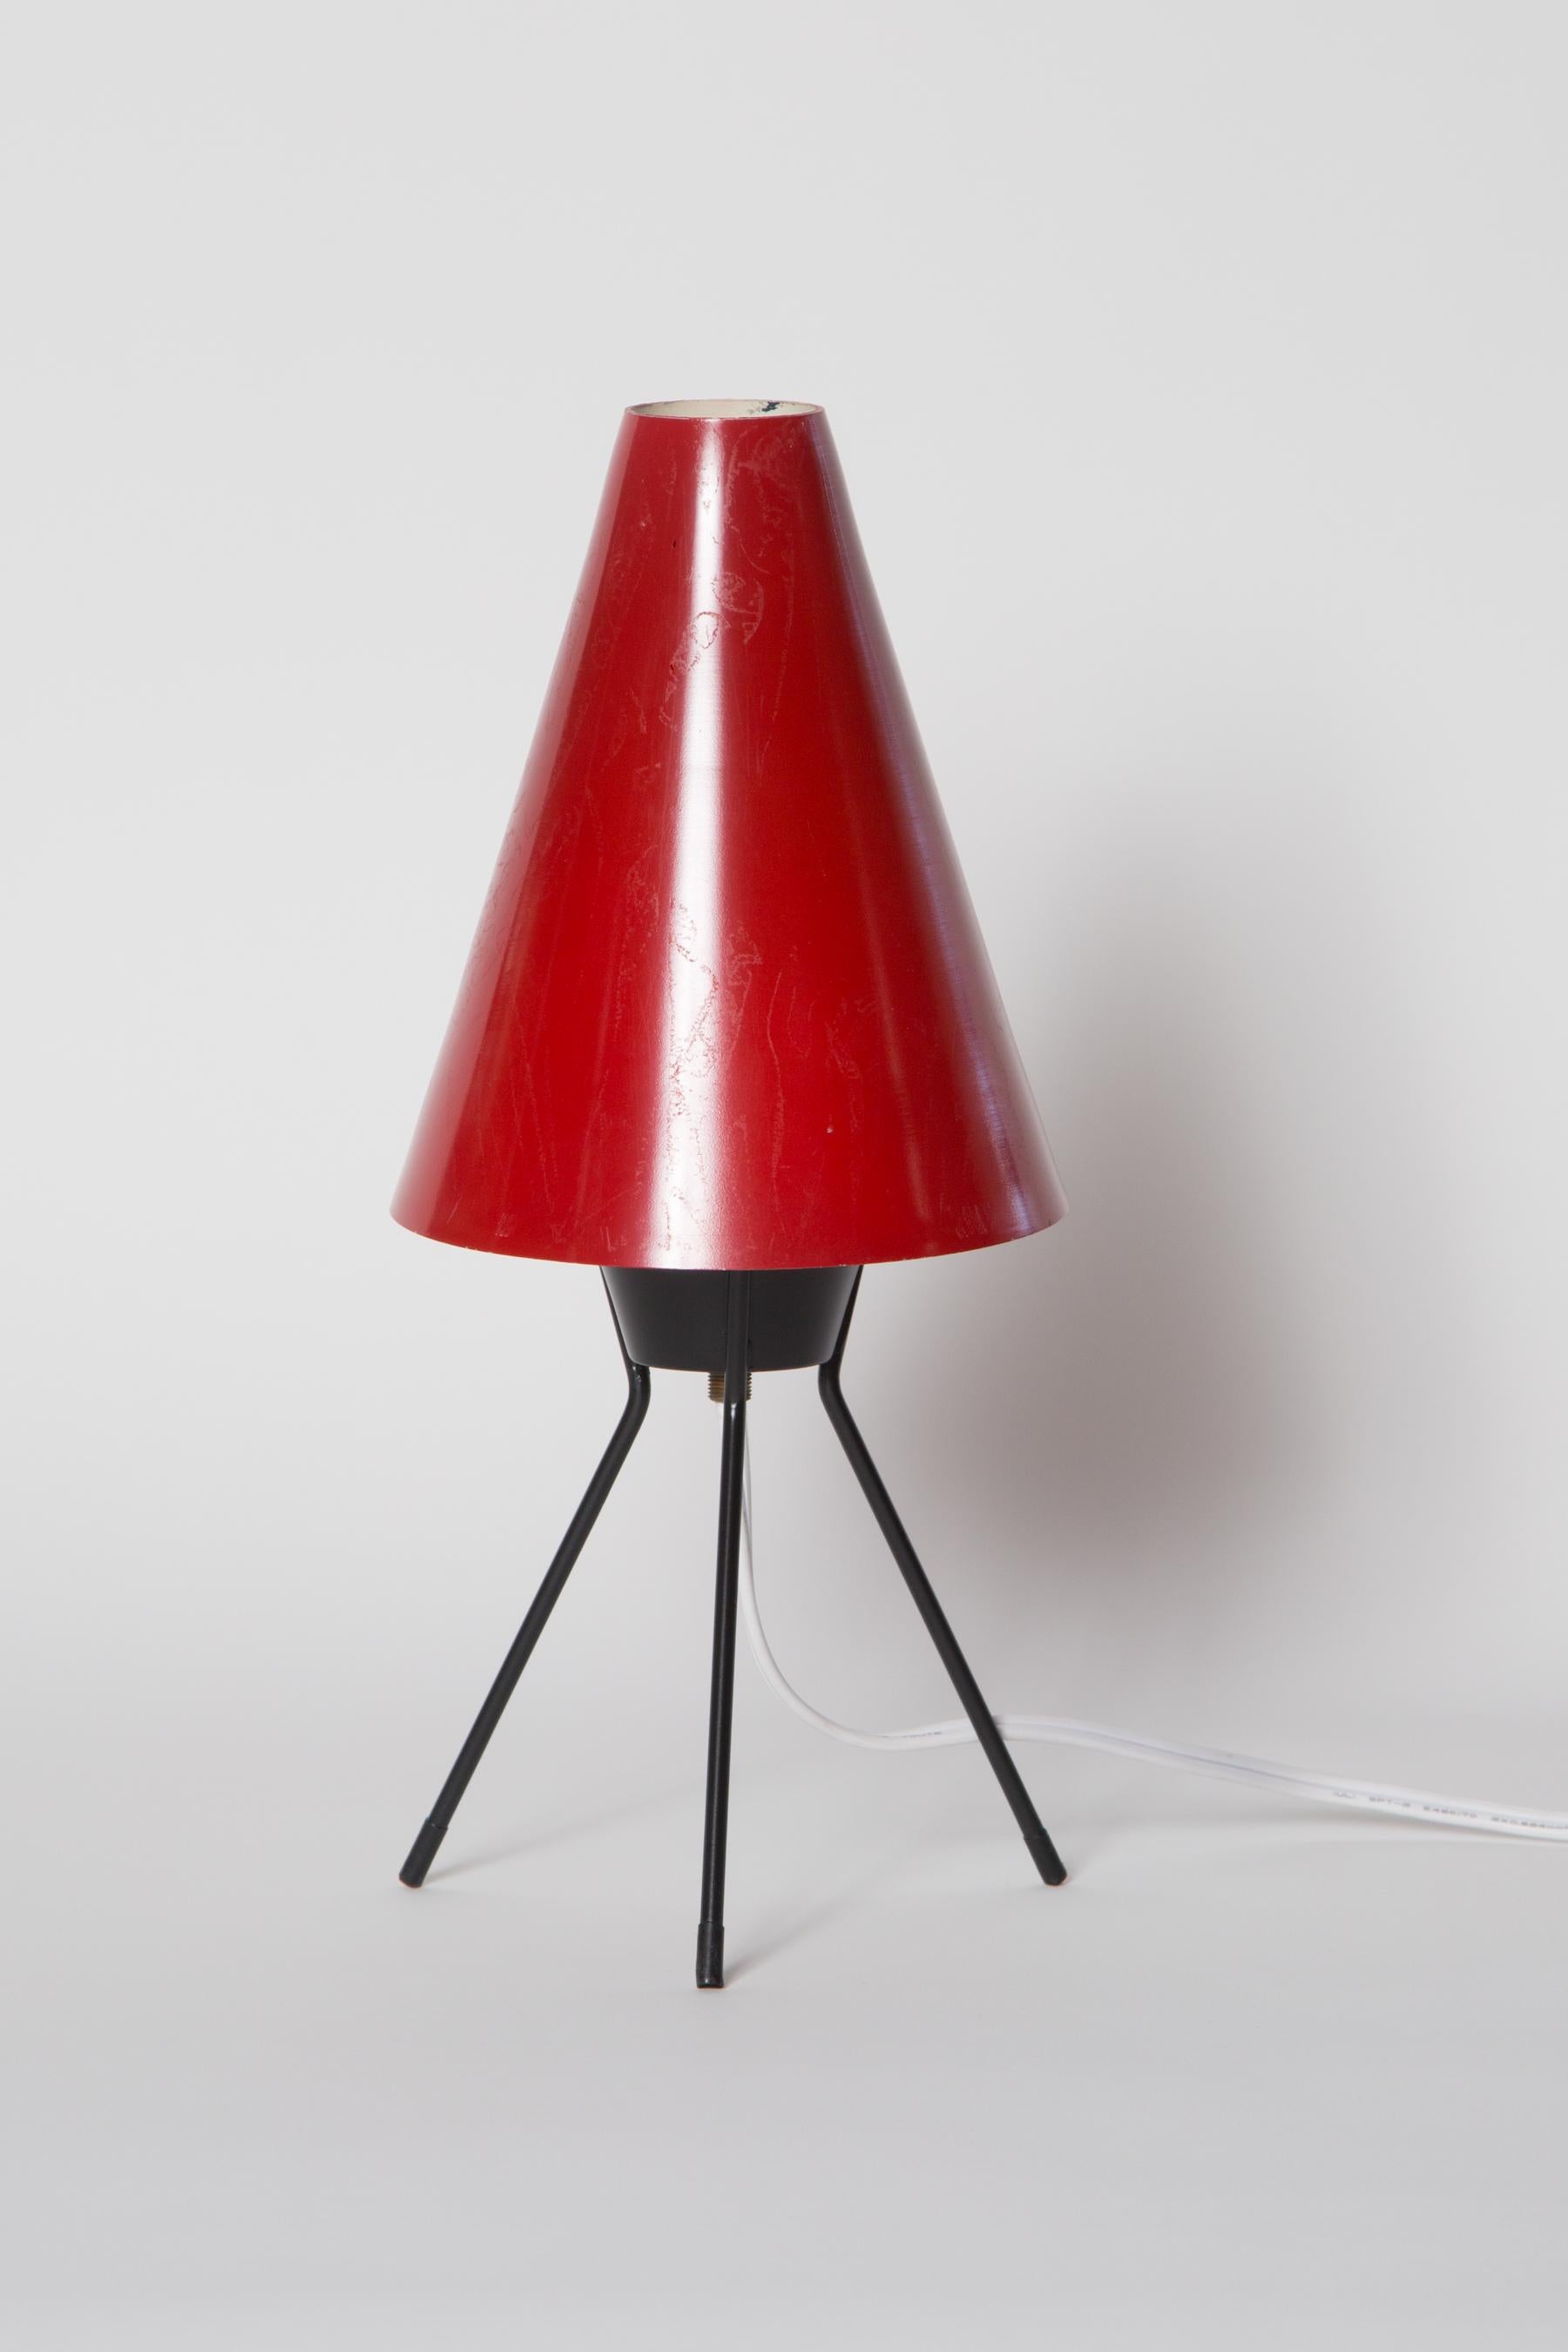 1960s Red 'Vice Versa' Tripod Table Lamp Attributed to Stilux Milano For Sale 2